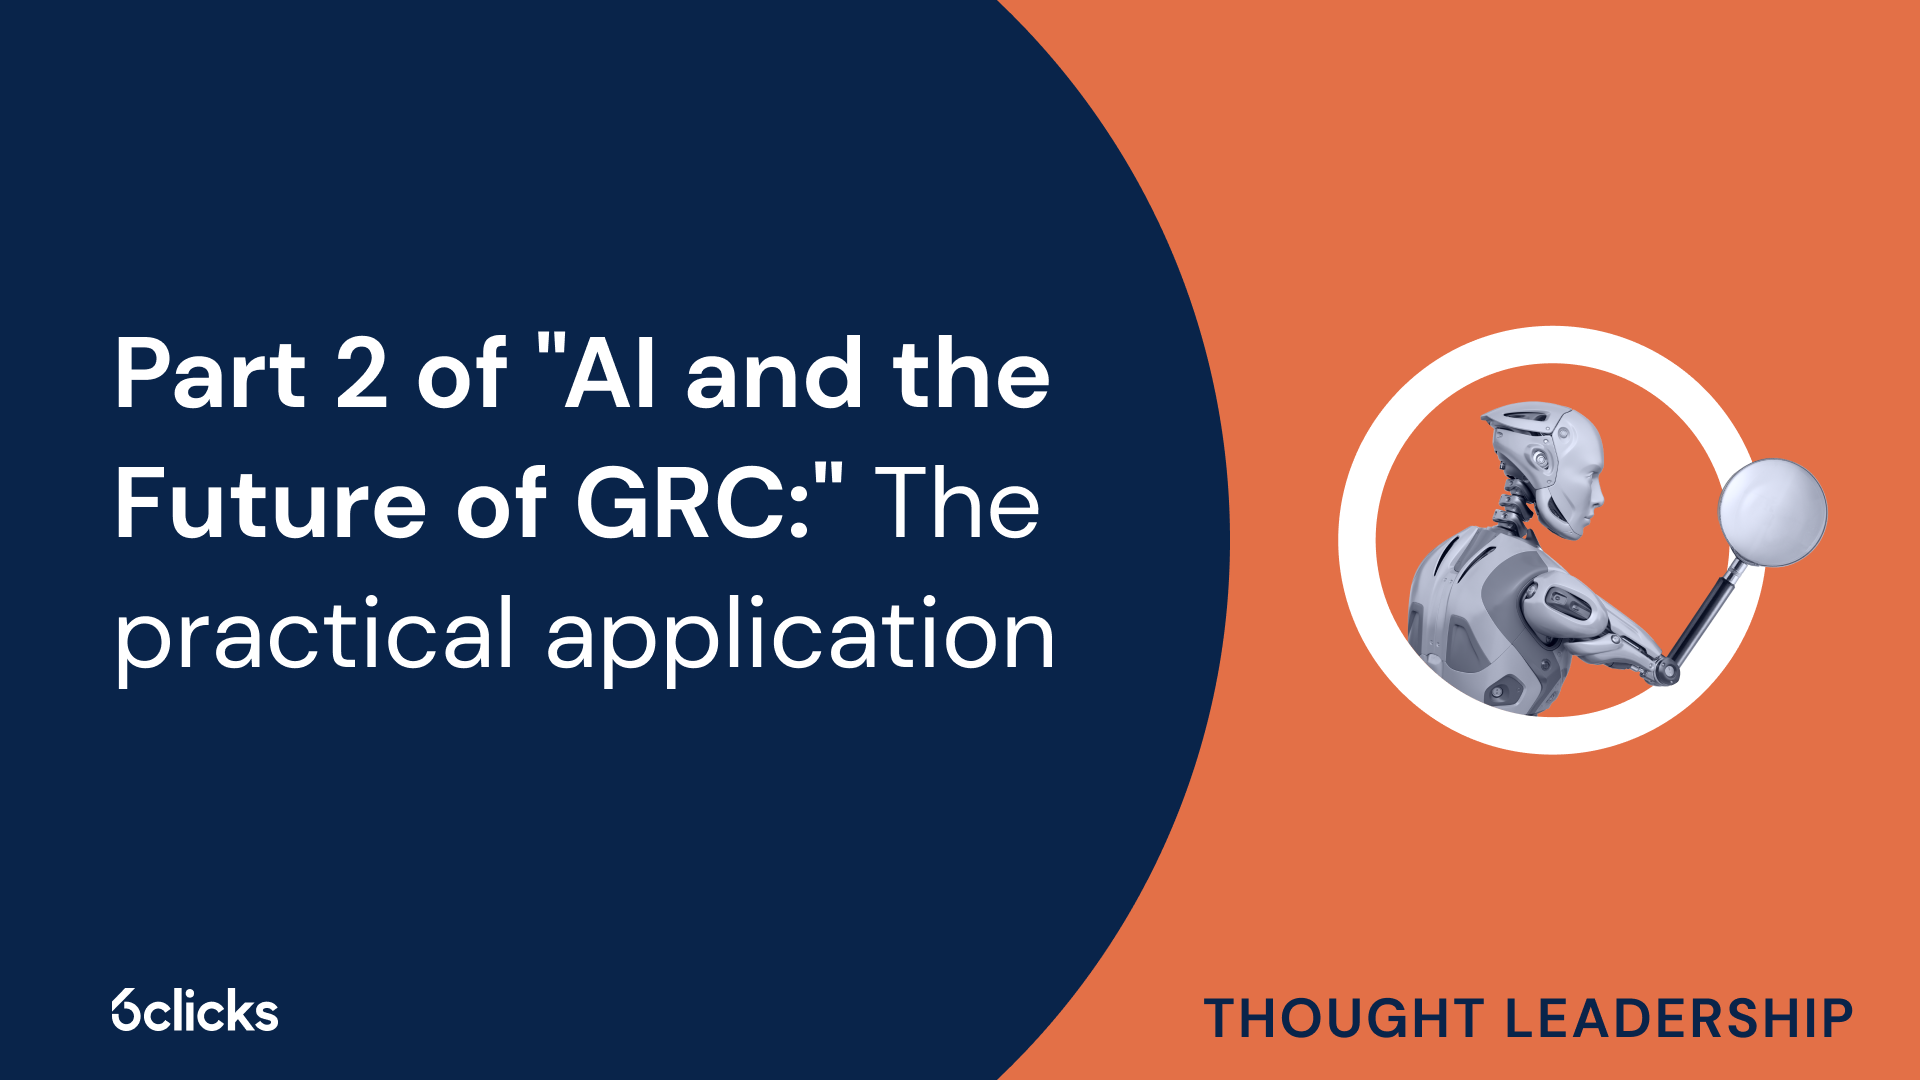 Part 2 of AI and the Future of GRC: The practical application